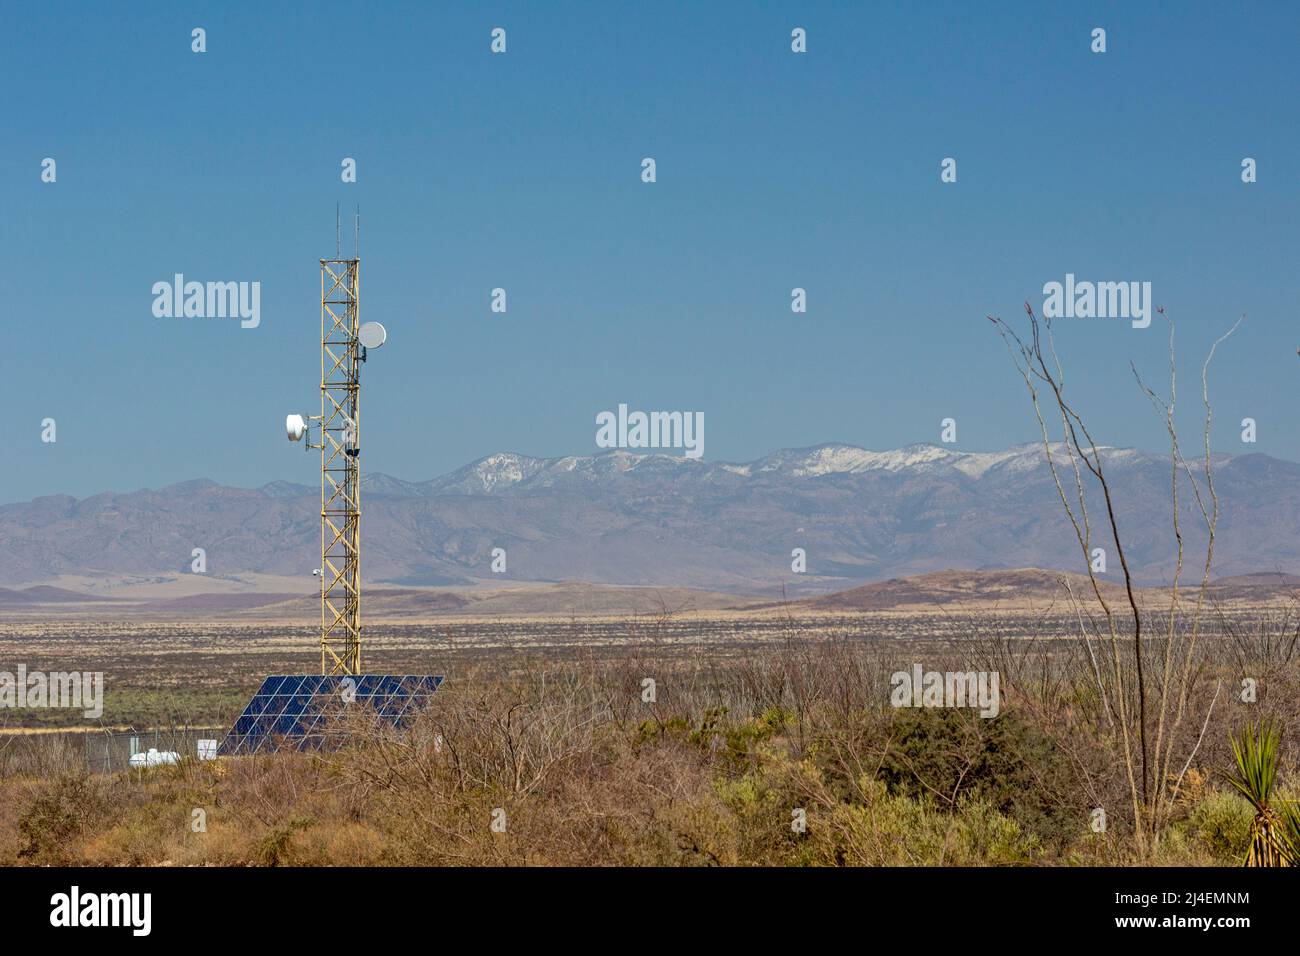 Douglas, Arizona - A U.S. Border Patrol surveillance tower near the Mexican border. In remote areas, the Border Patrol has increased its reliance on s Stock Photo